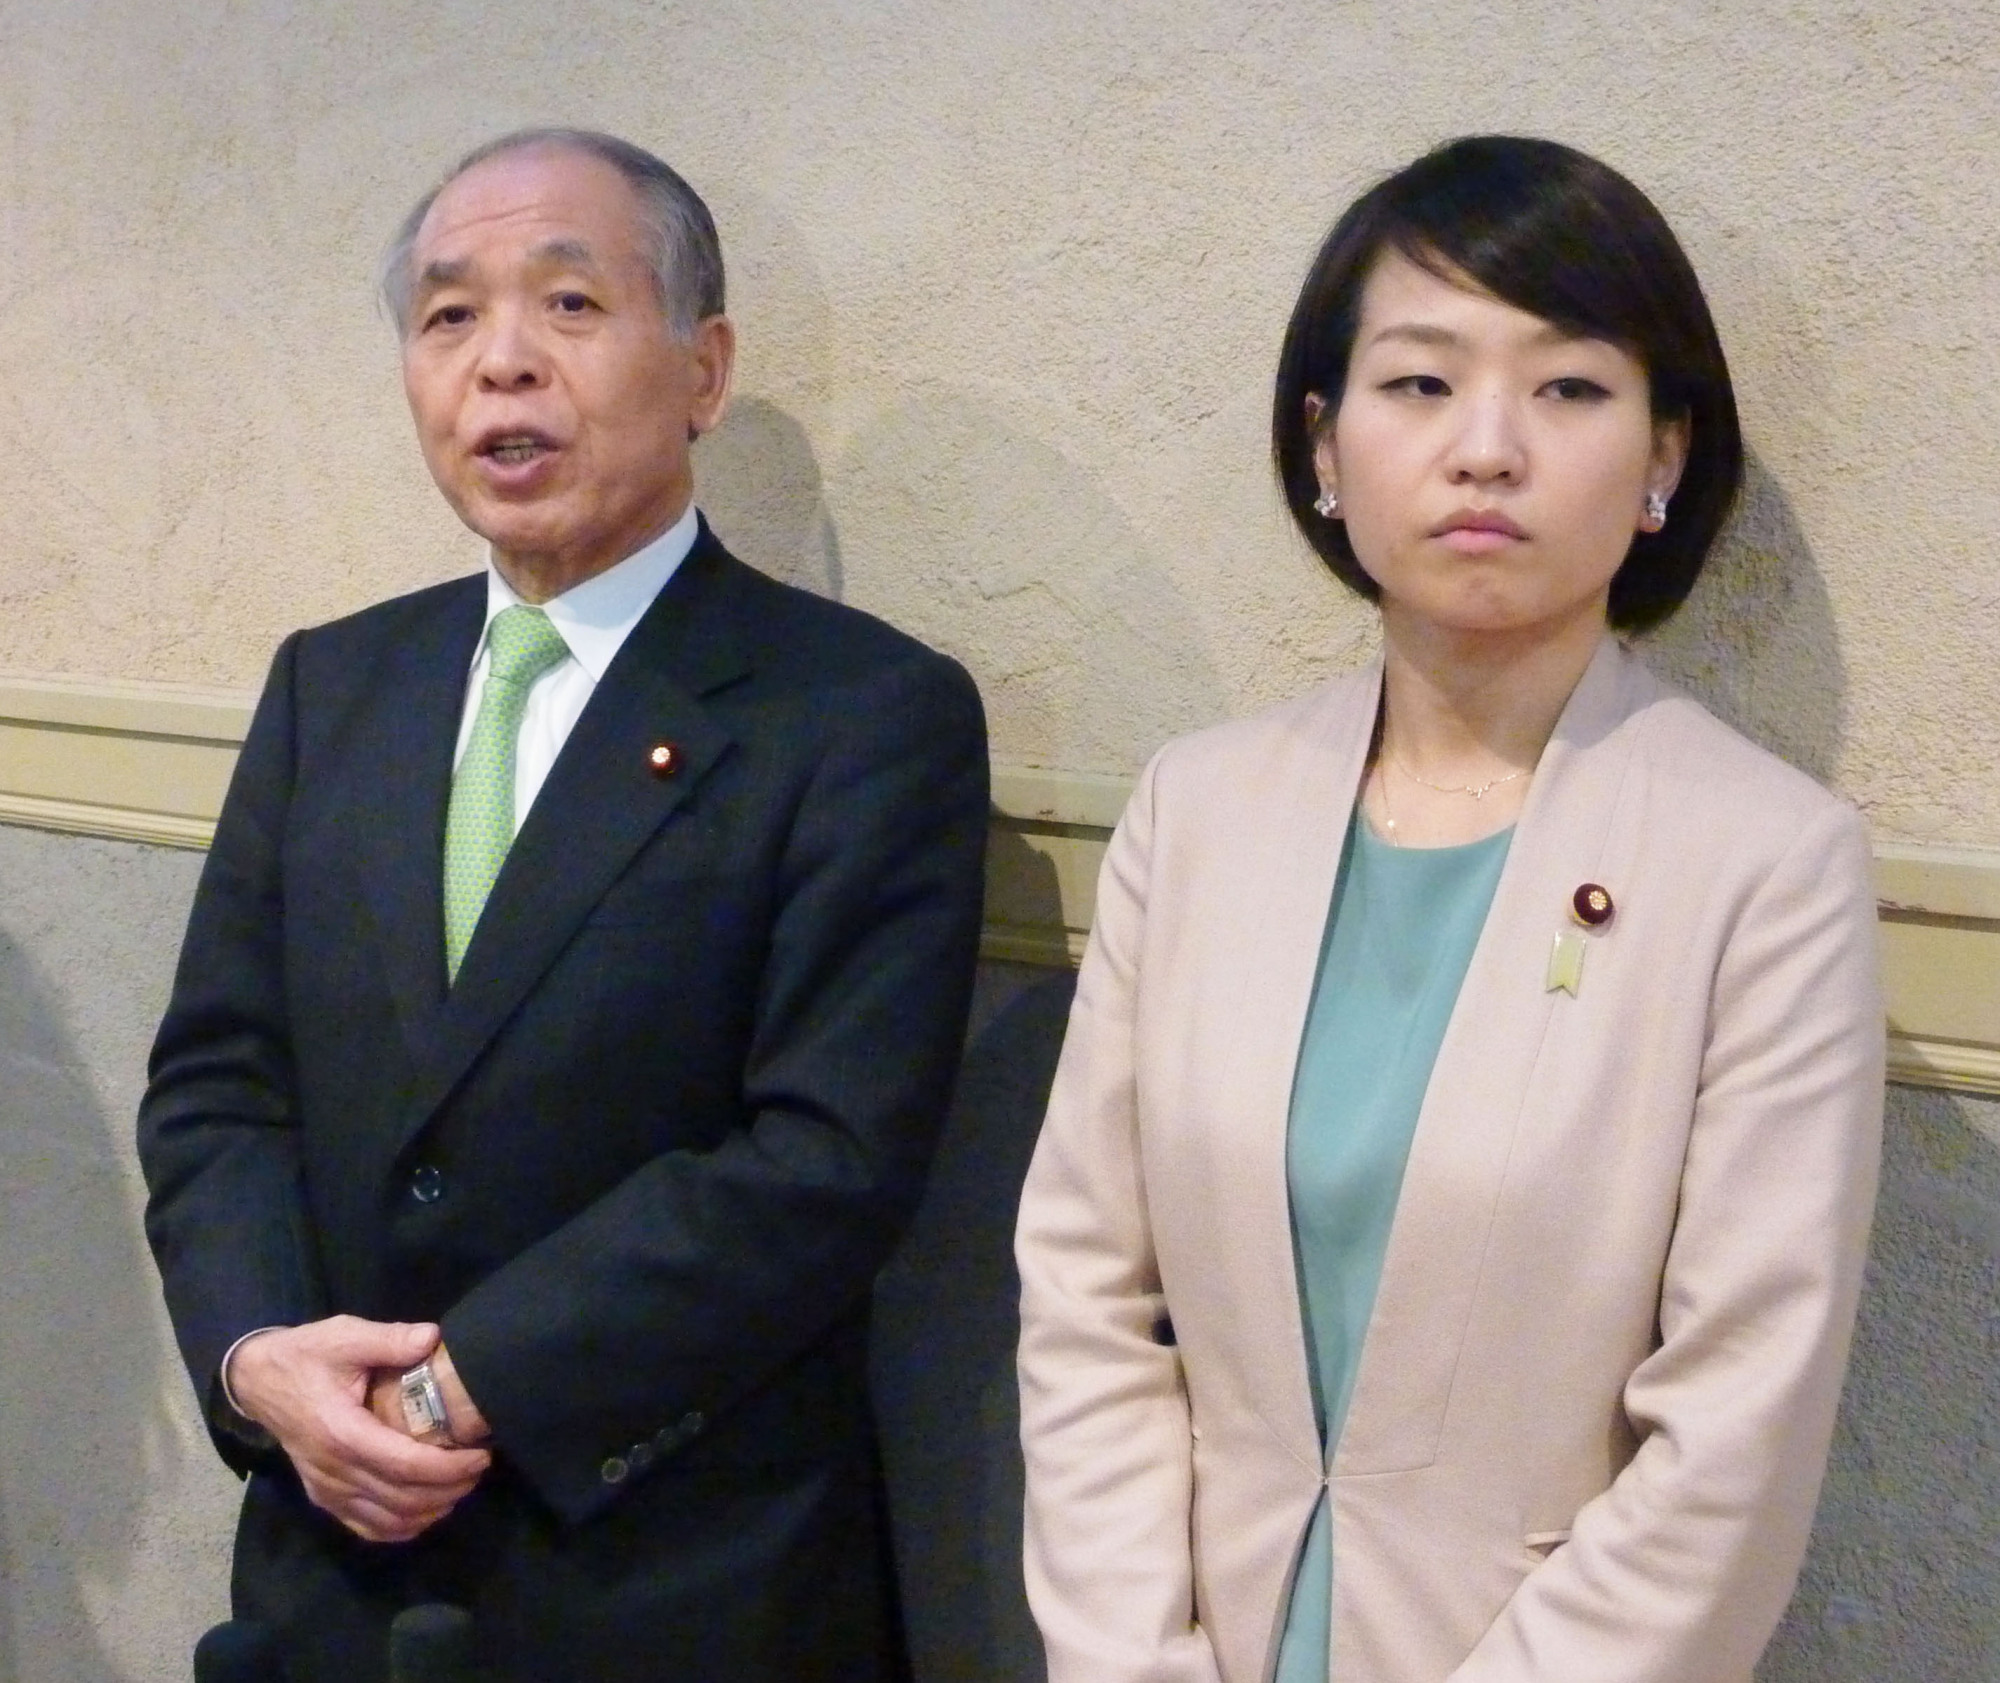 Trolled: After announcing her pregnancy on July 12, the blog of Lower House Hokkaido lawmaker Takako Suzuki &#8212; pictured here with her father, Muneo &#8212; received comments to the effect that she couldn't be a lawmaker and a mother at the same time. | KYODO